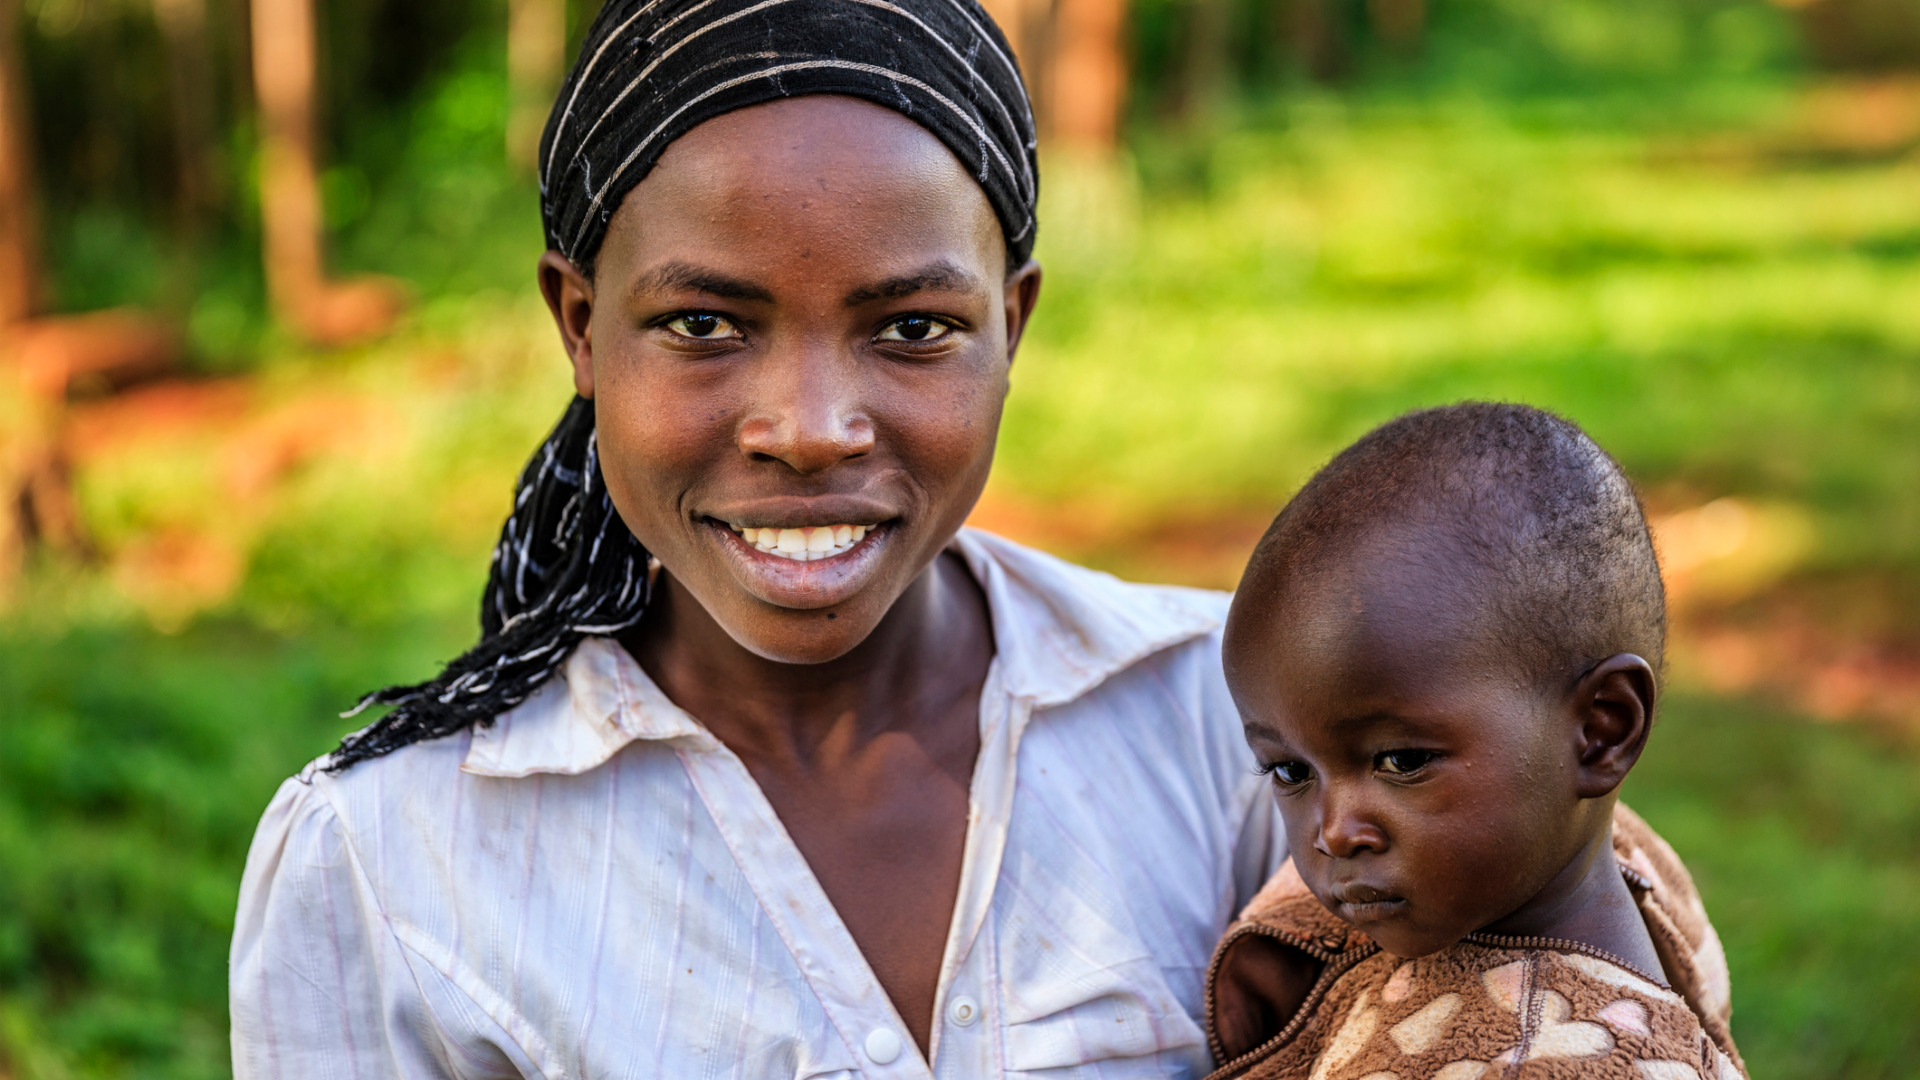 How could digital identity improve maternity and childcare in Kenya?